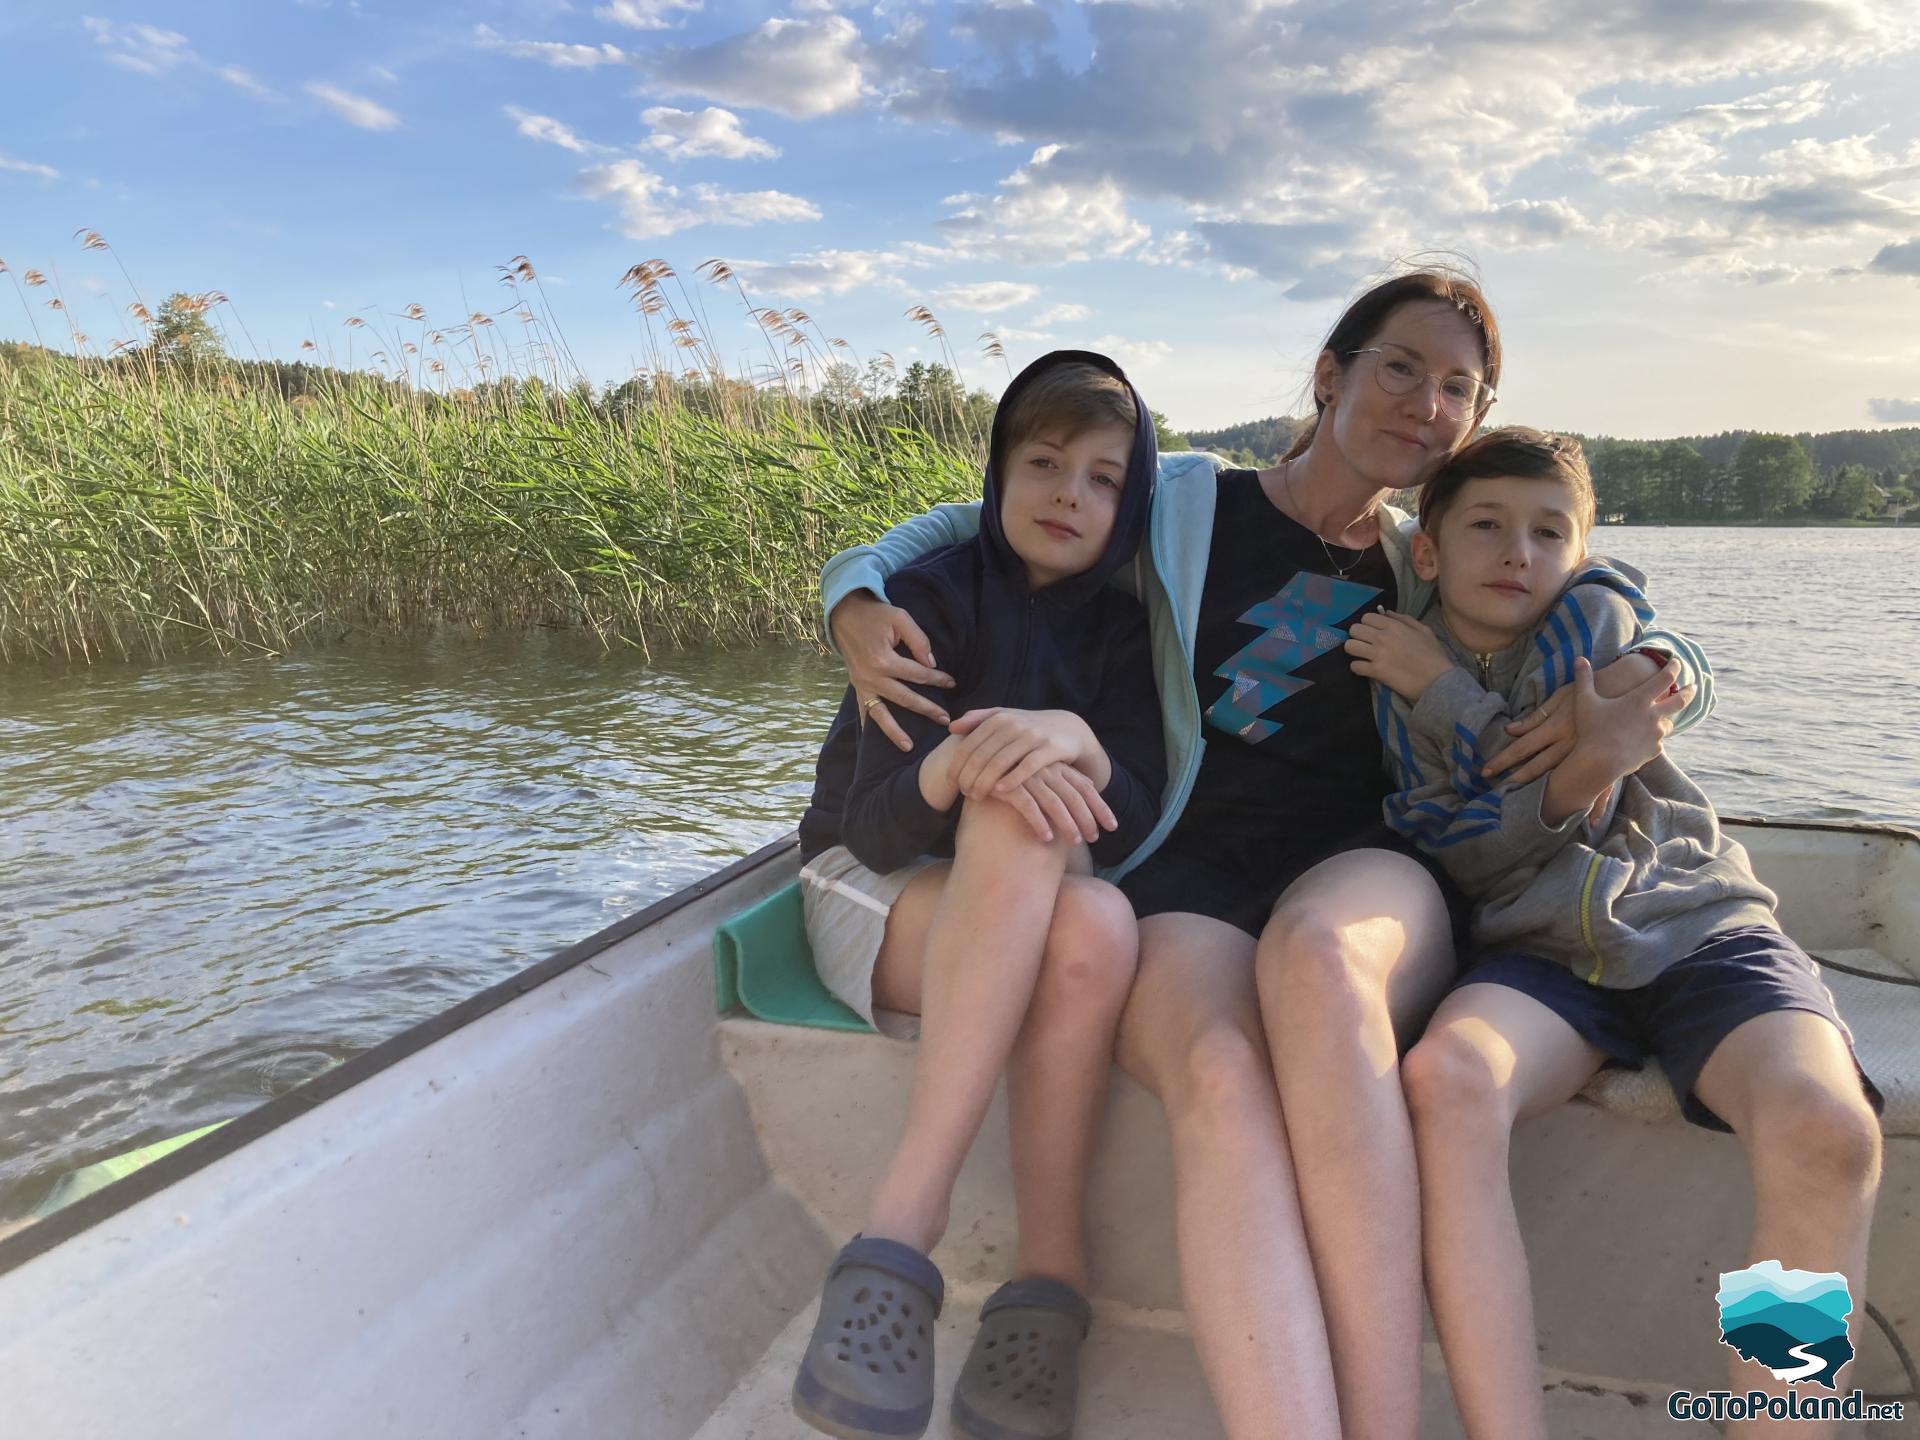 A woman and two boys on a small boat